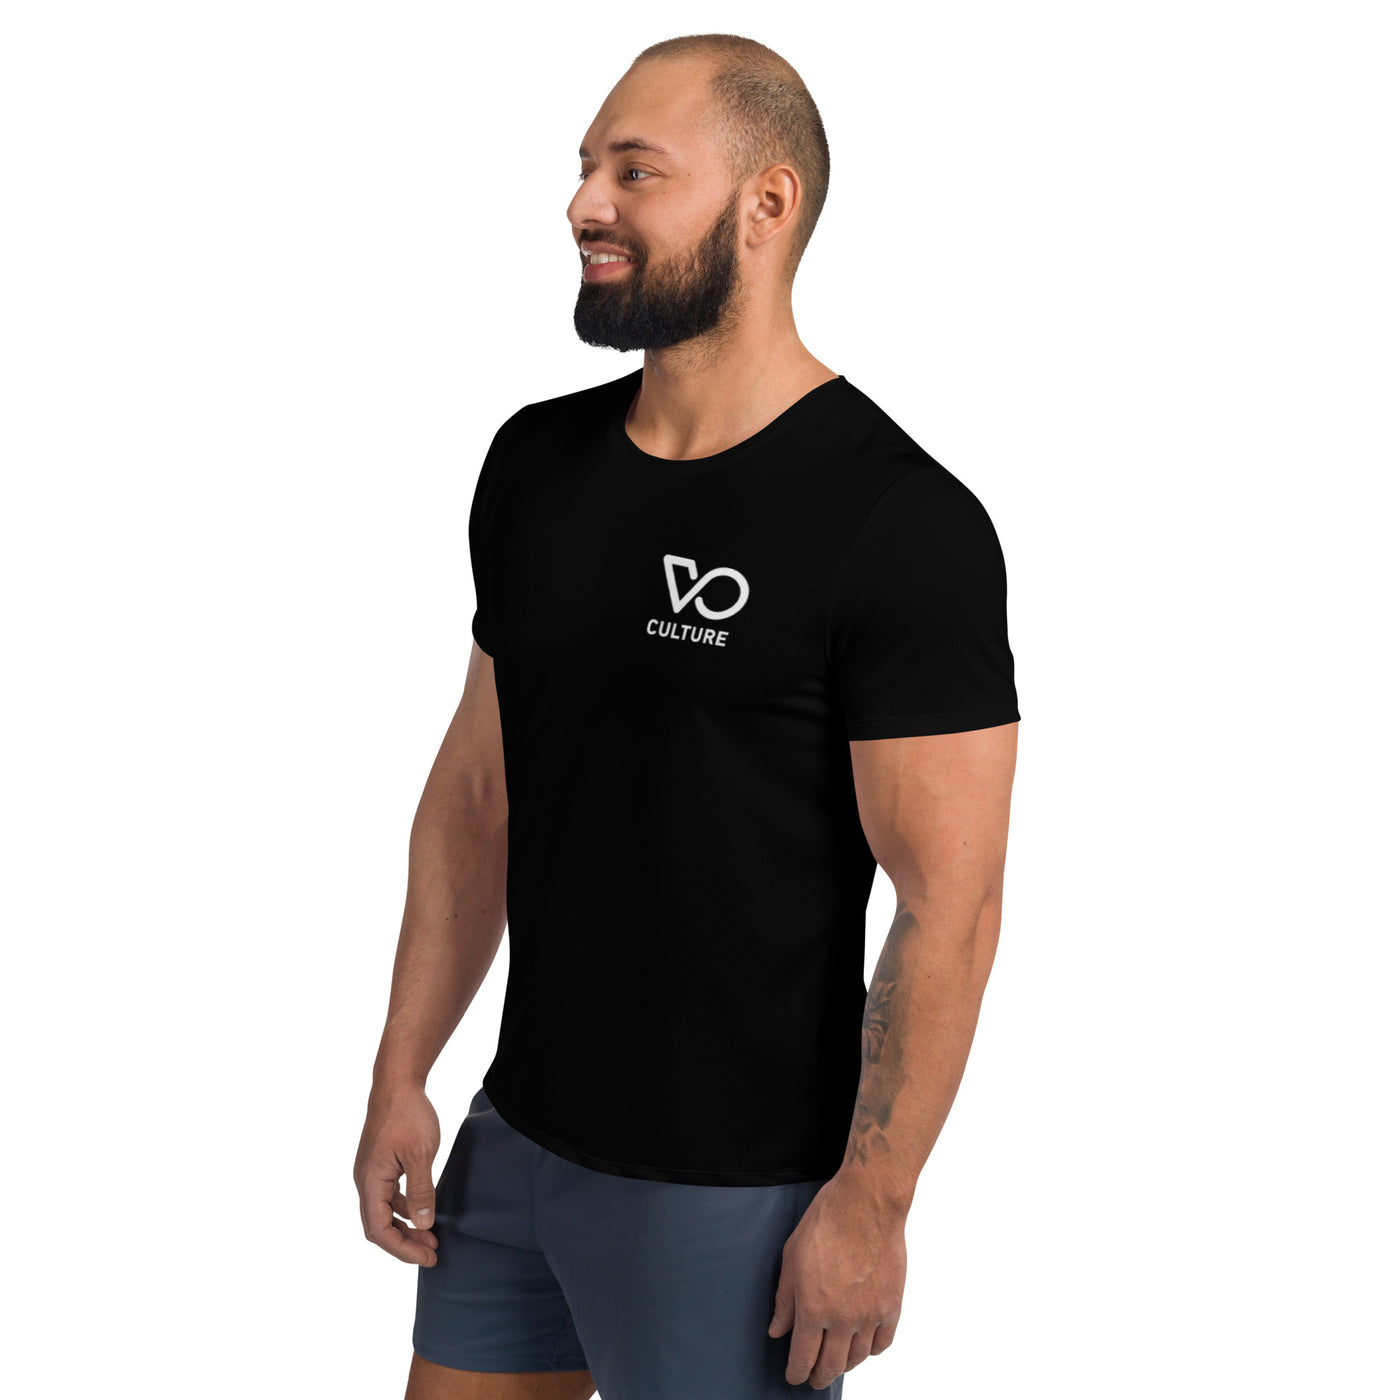 WE HEAR YOU Male Athletic T-shirt